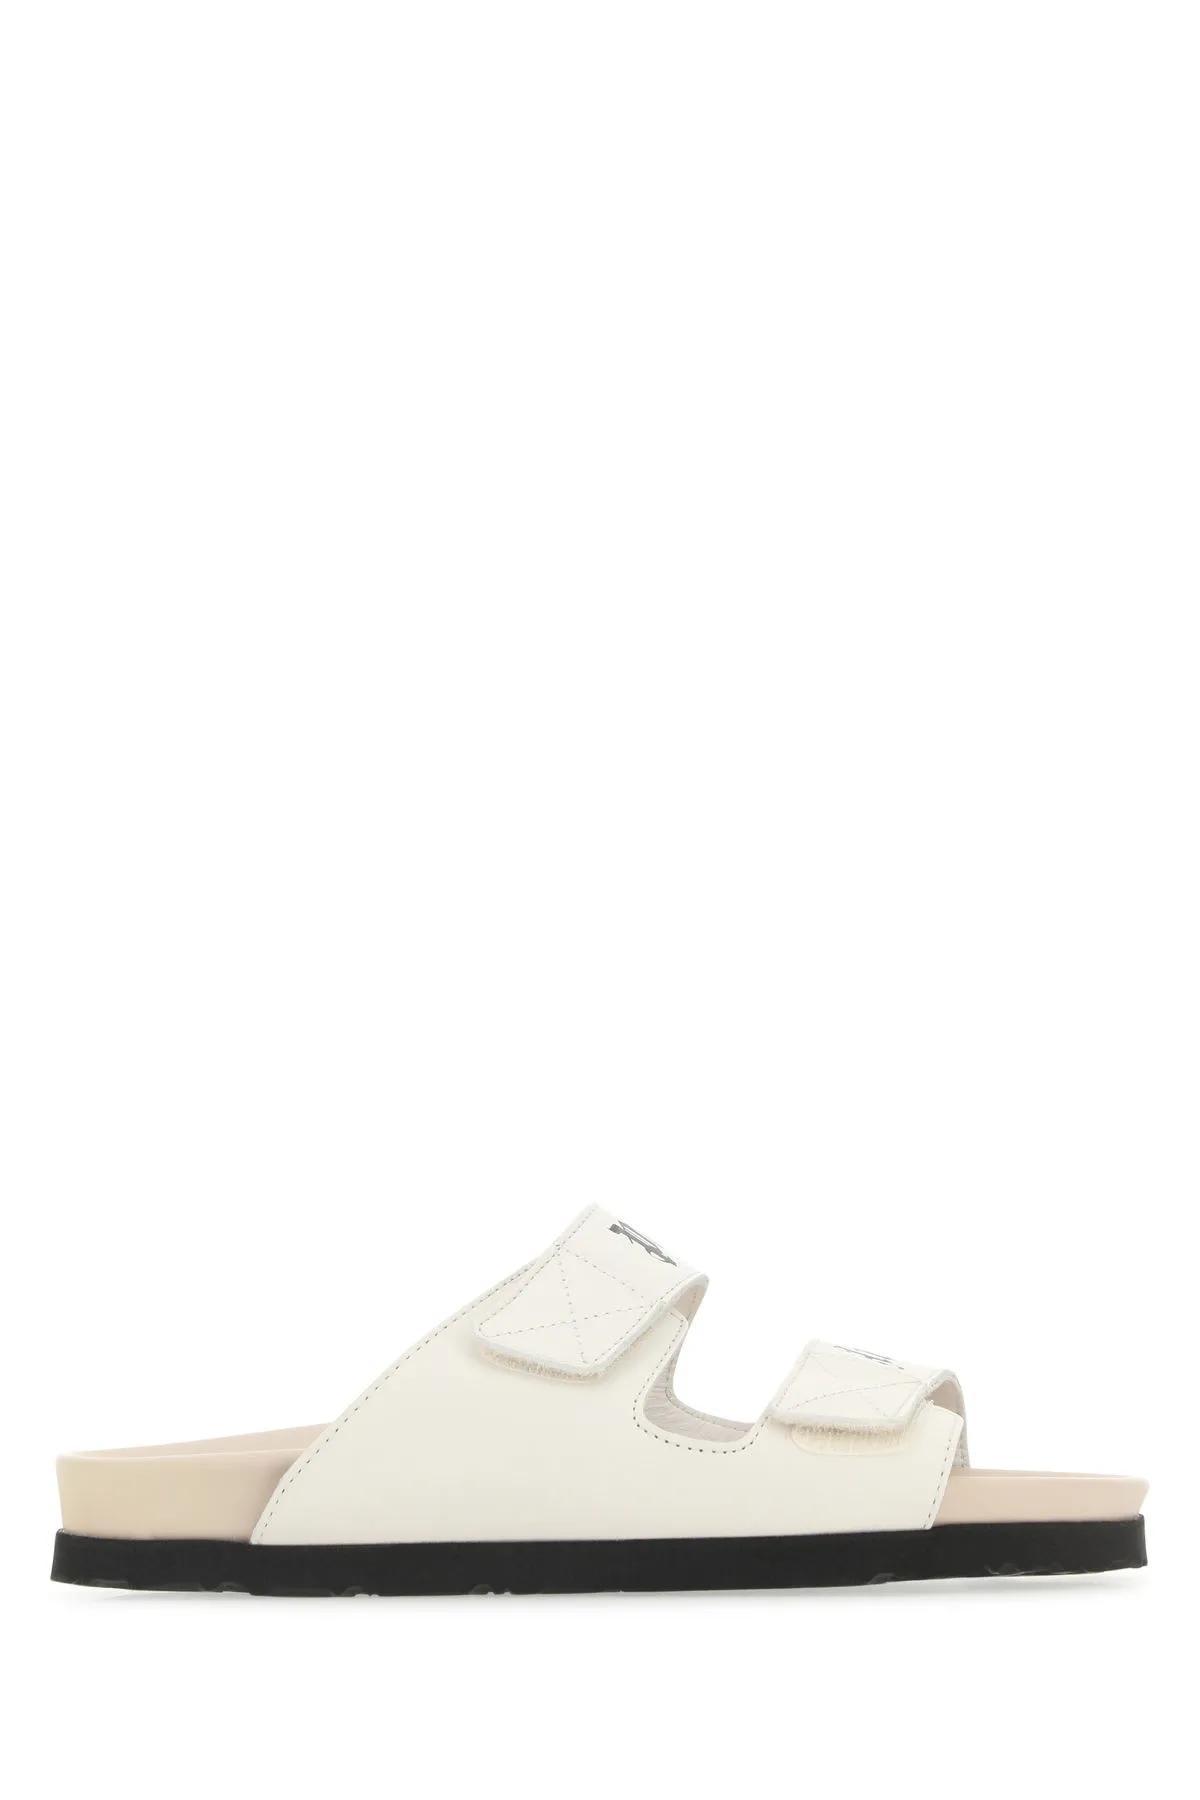 Palm Angels Ivory Leather Slippers